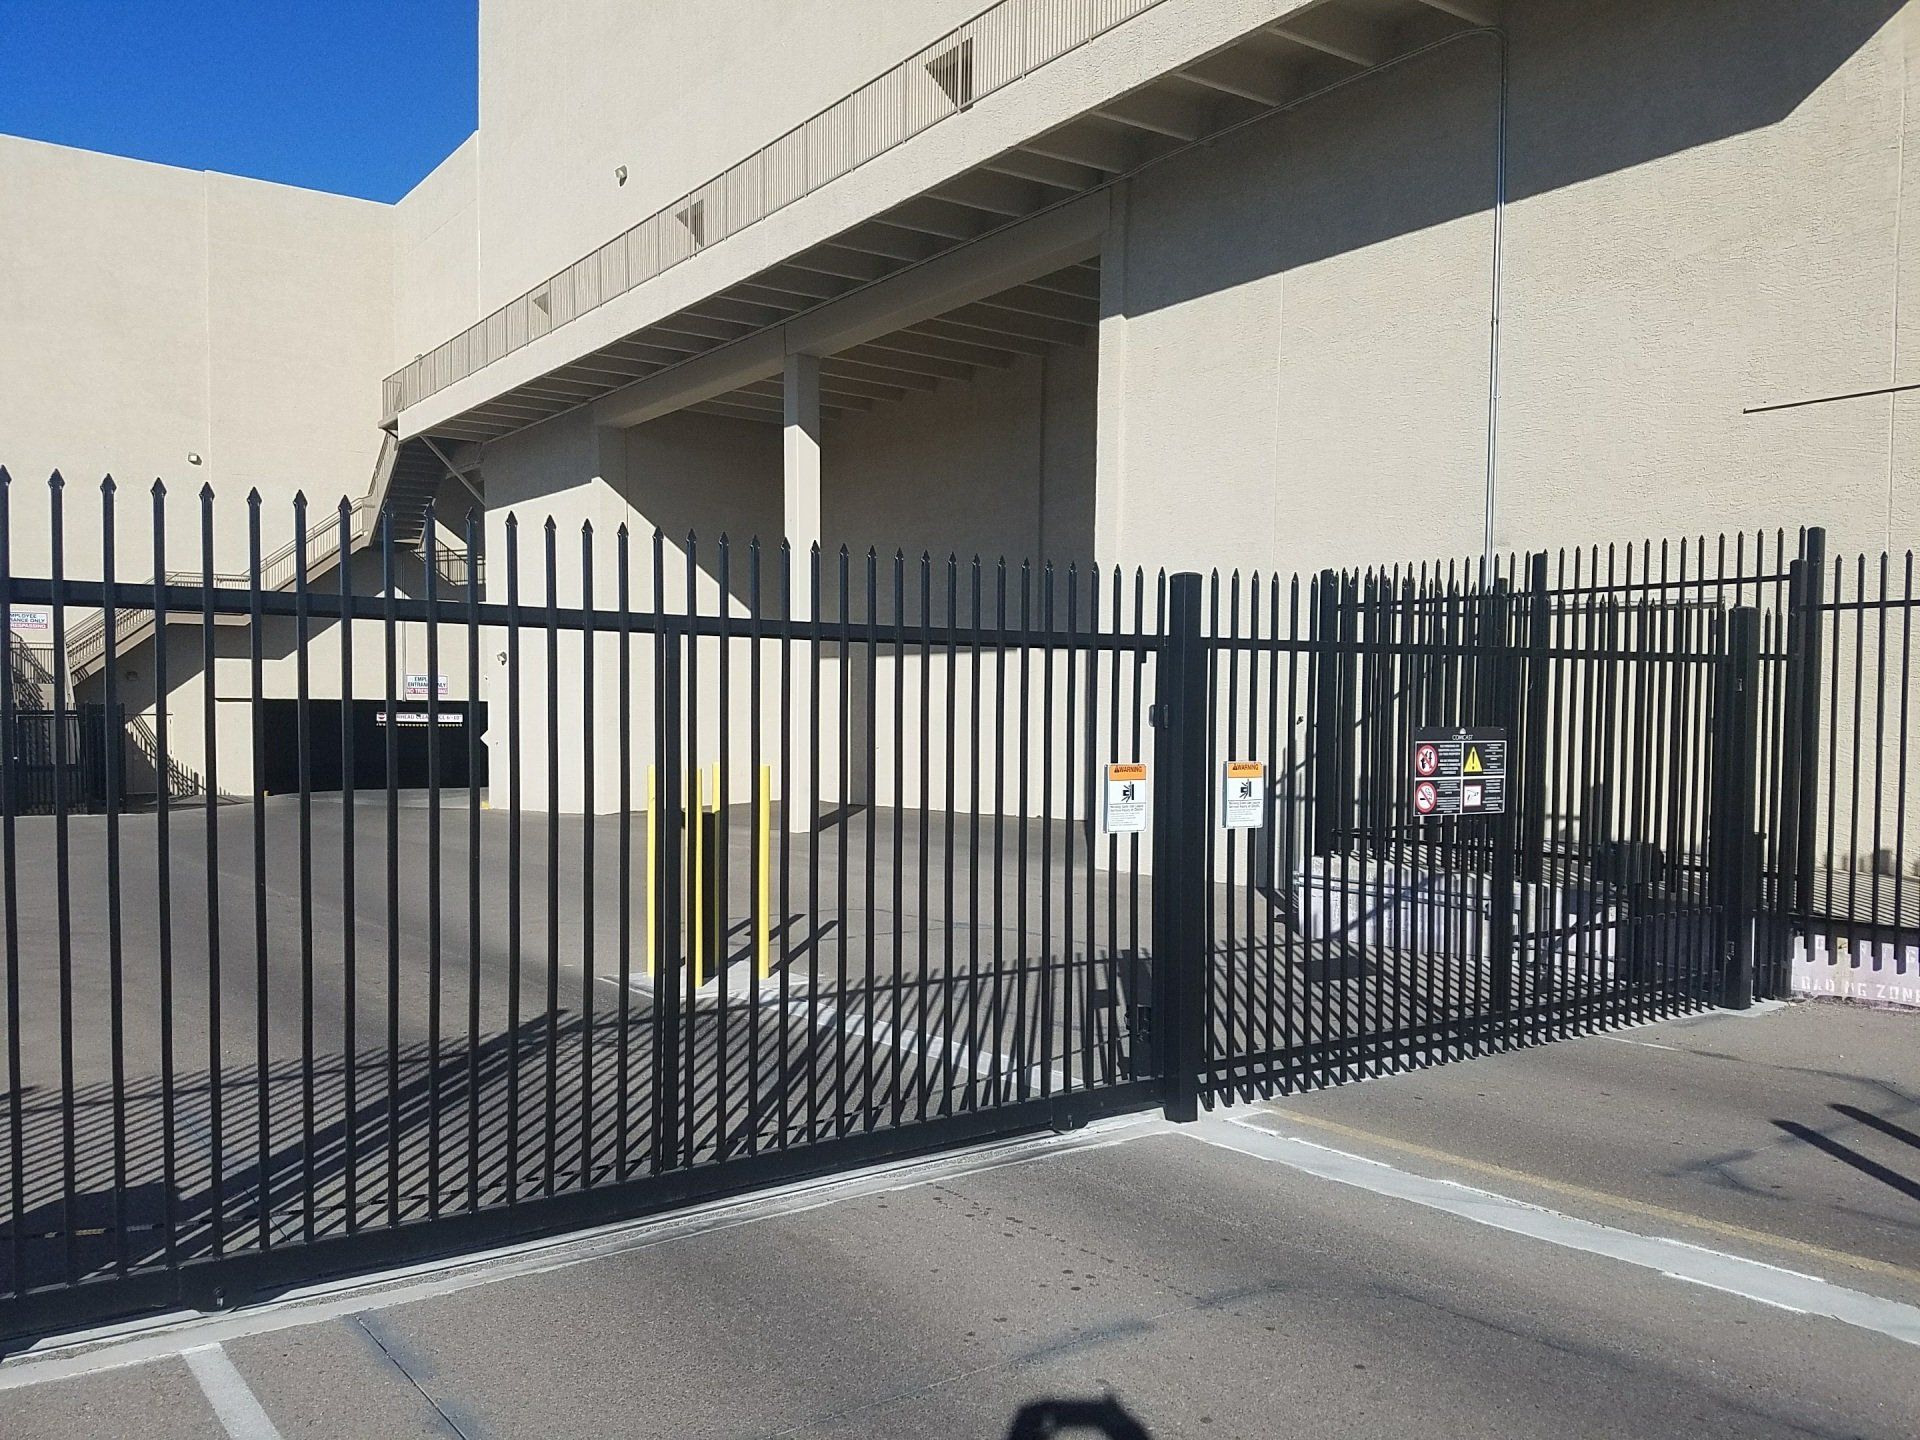 Stair fence — Fence products in Tucson, AZ